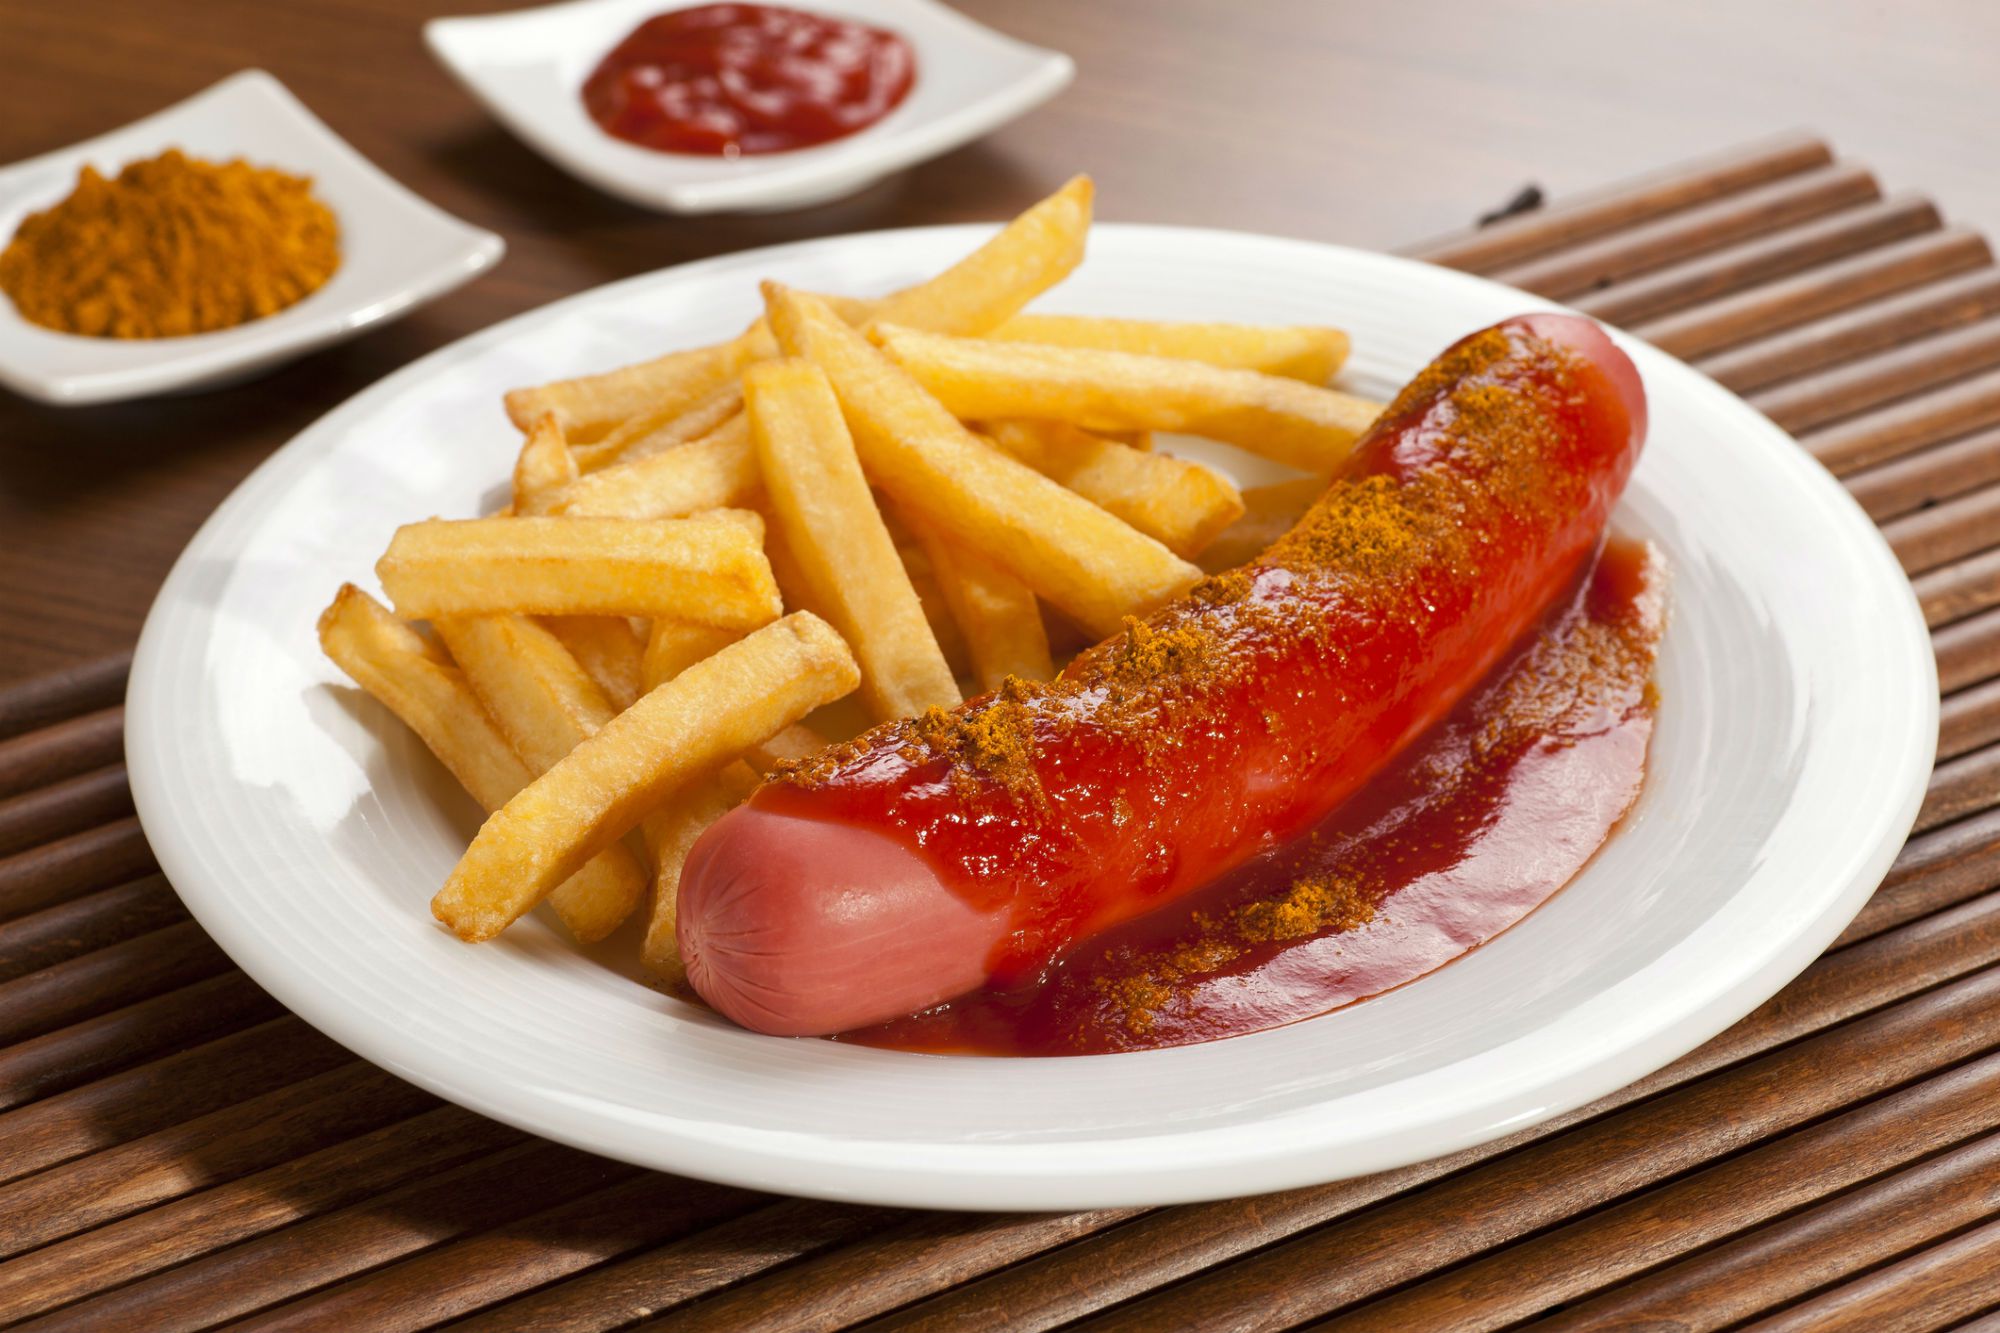 German Sausage With Curry Ketchup (Currywurst) Recipe